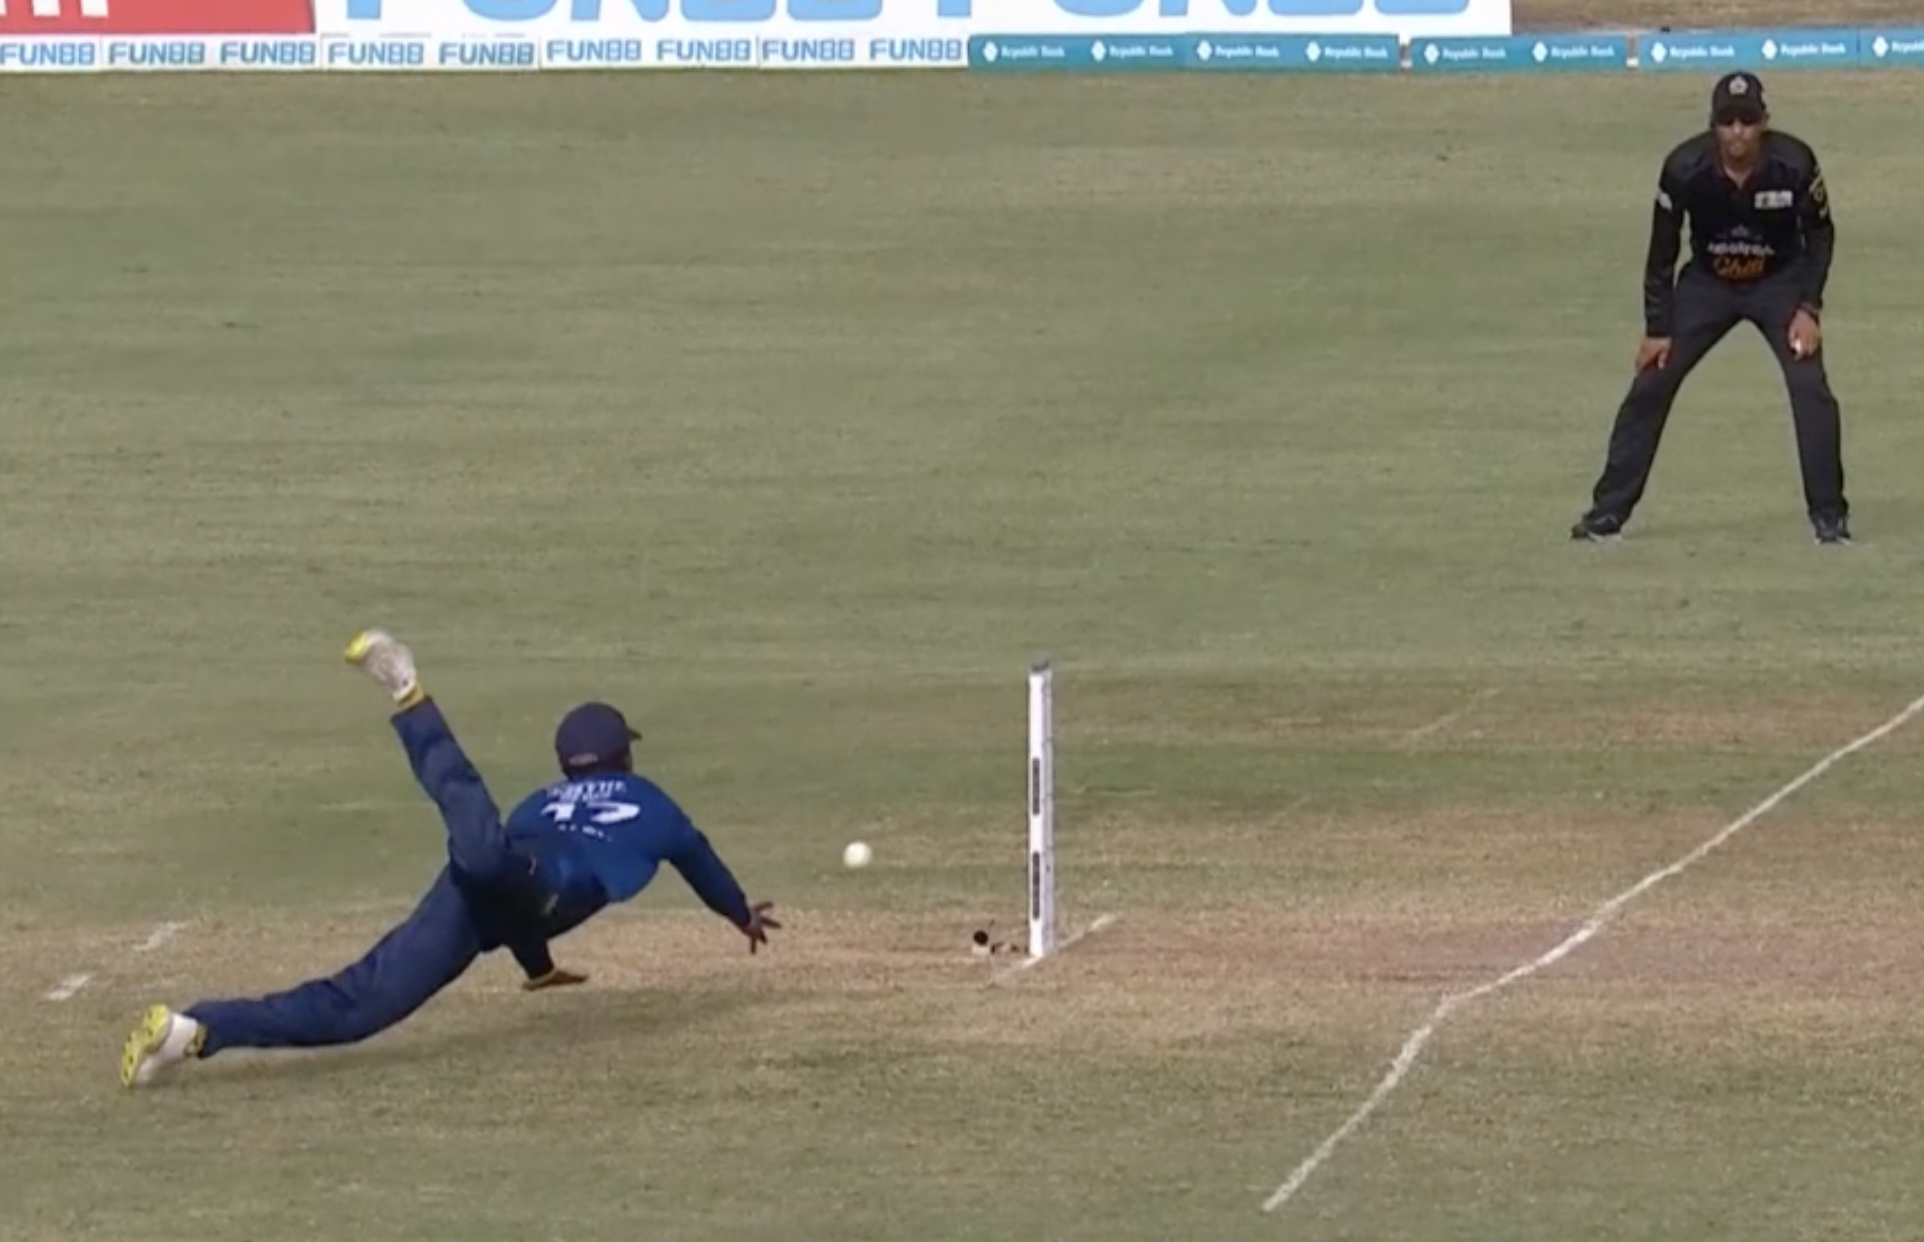 SPECTACULAR! Walsh takes flight to pull off a run-out